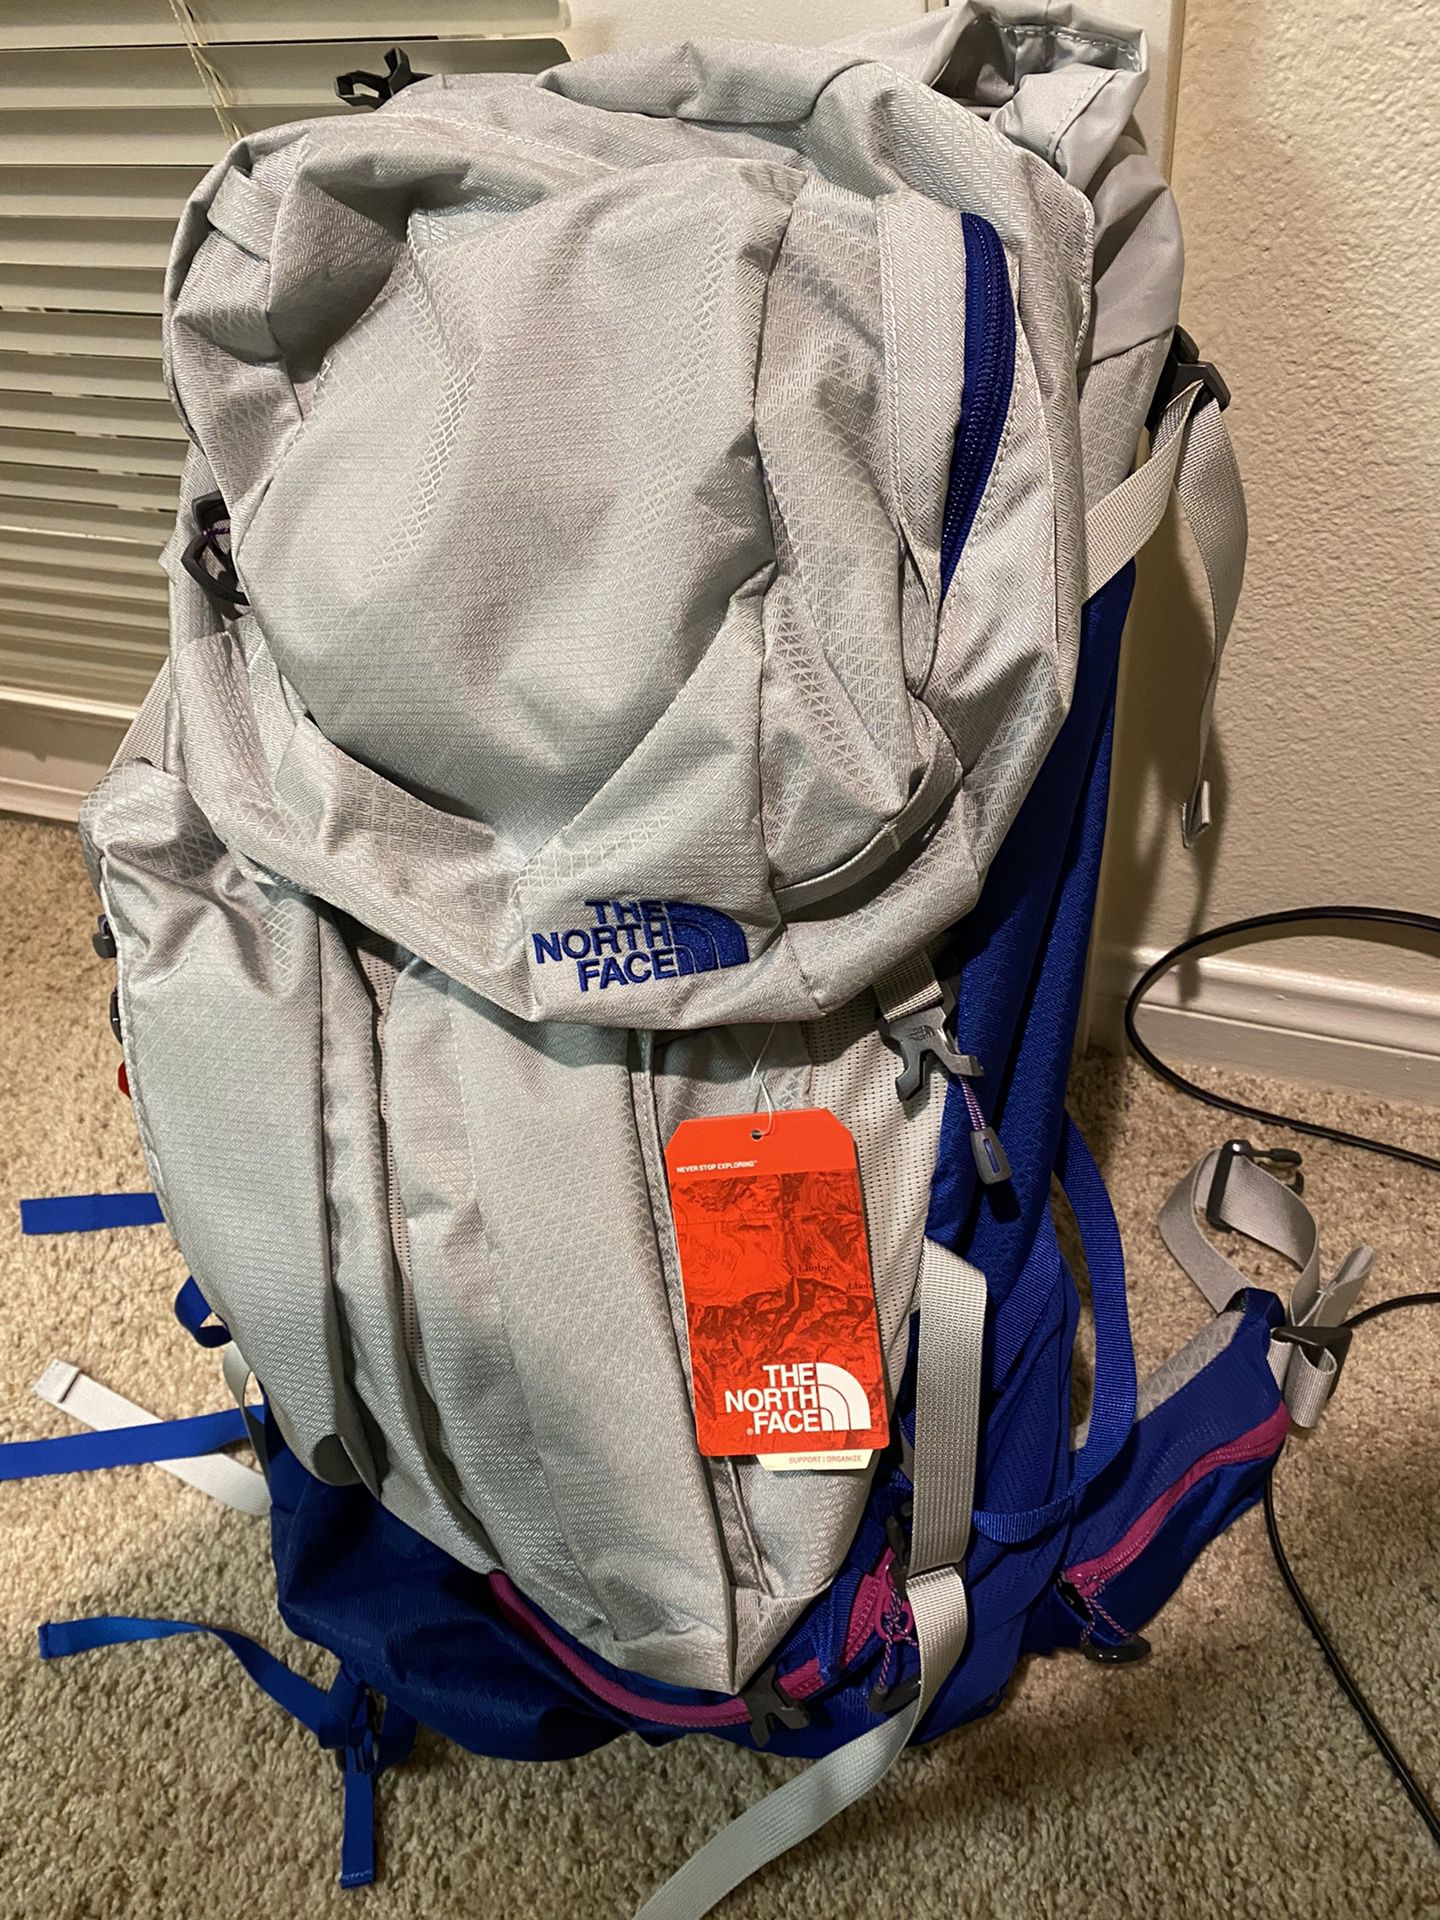 North Face Fovero 70 Backpack Women’s - BRAND NEW